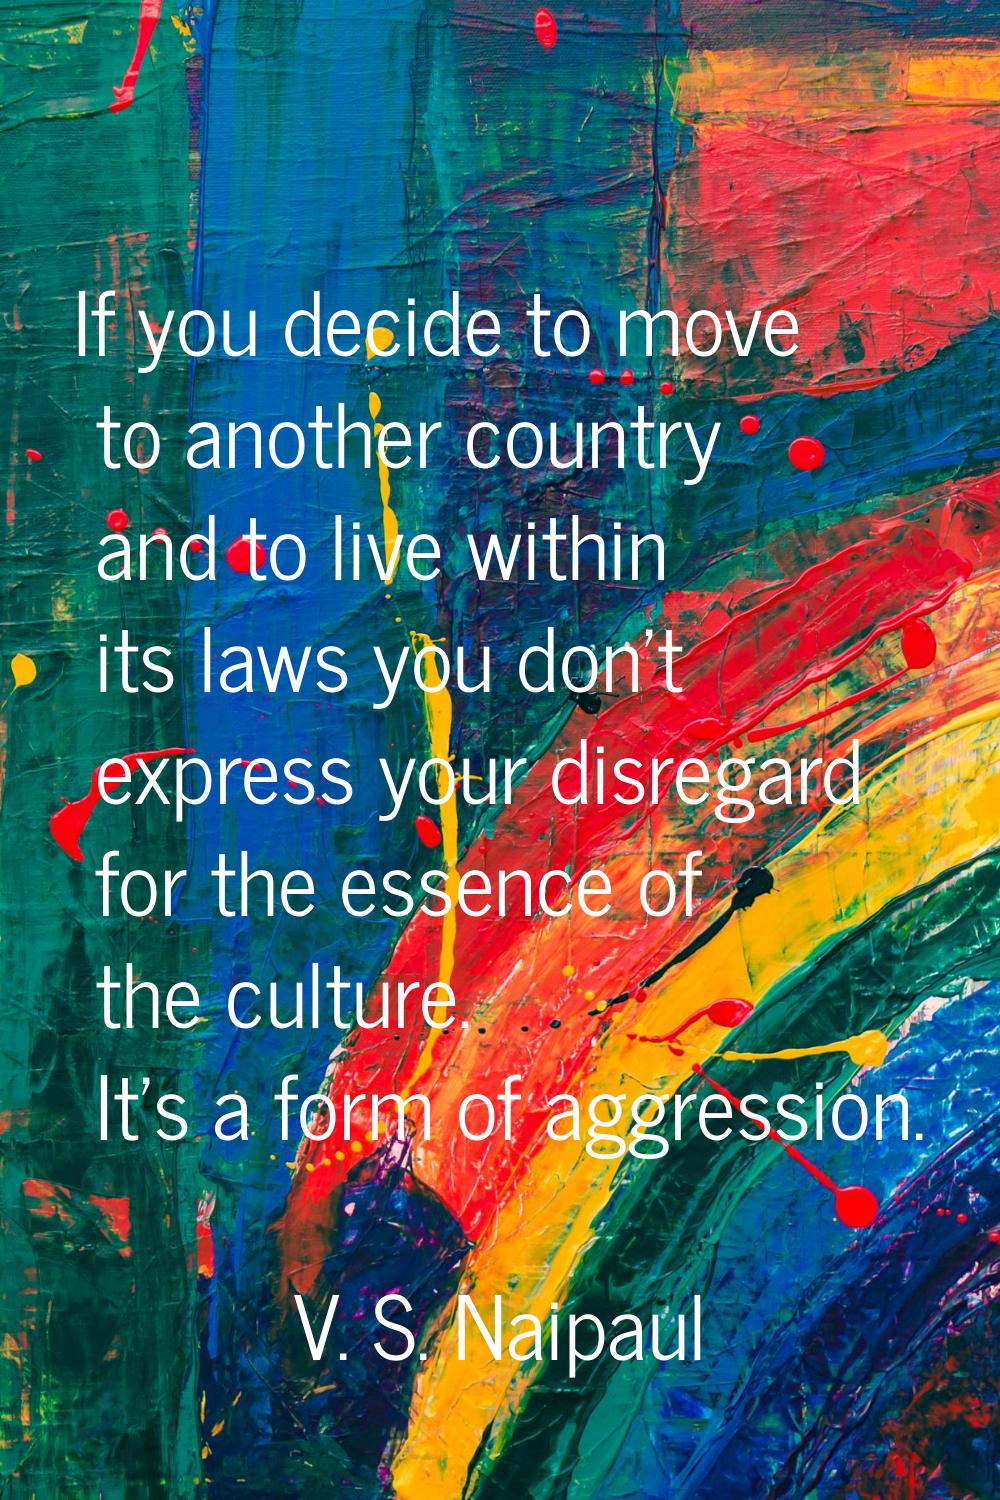 If you decide to move to another country and to live within its laws you don't express your disrega